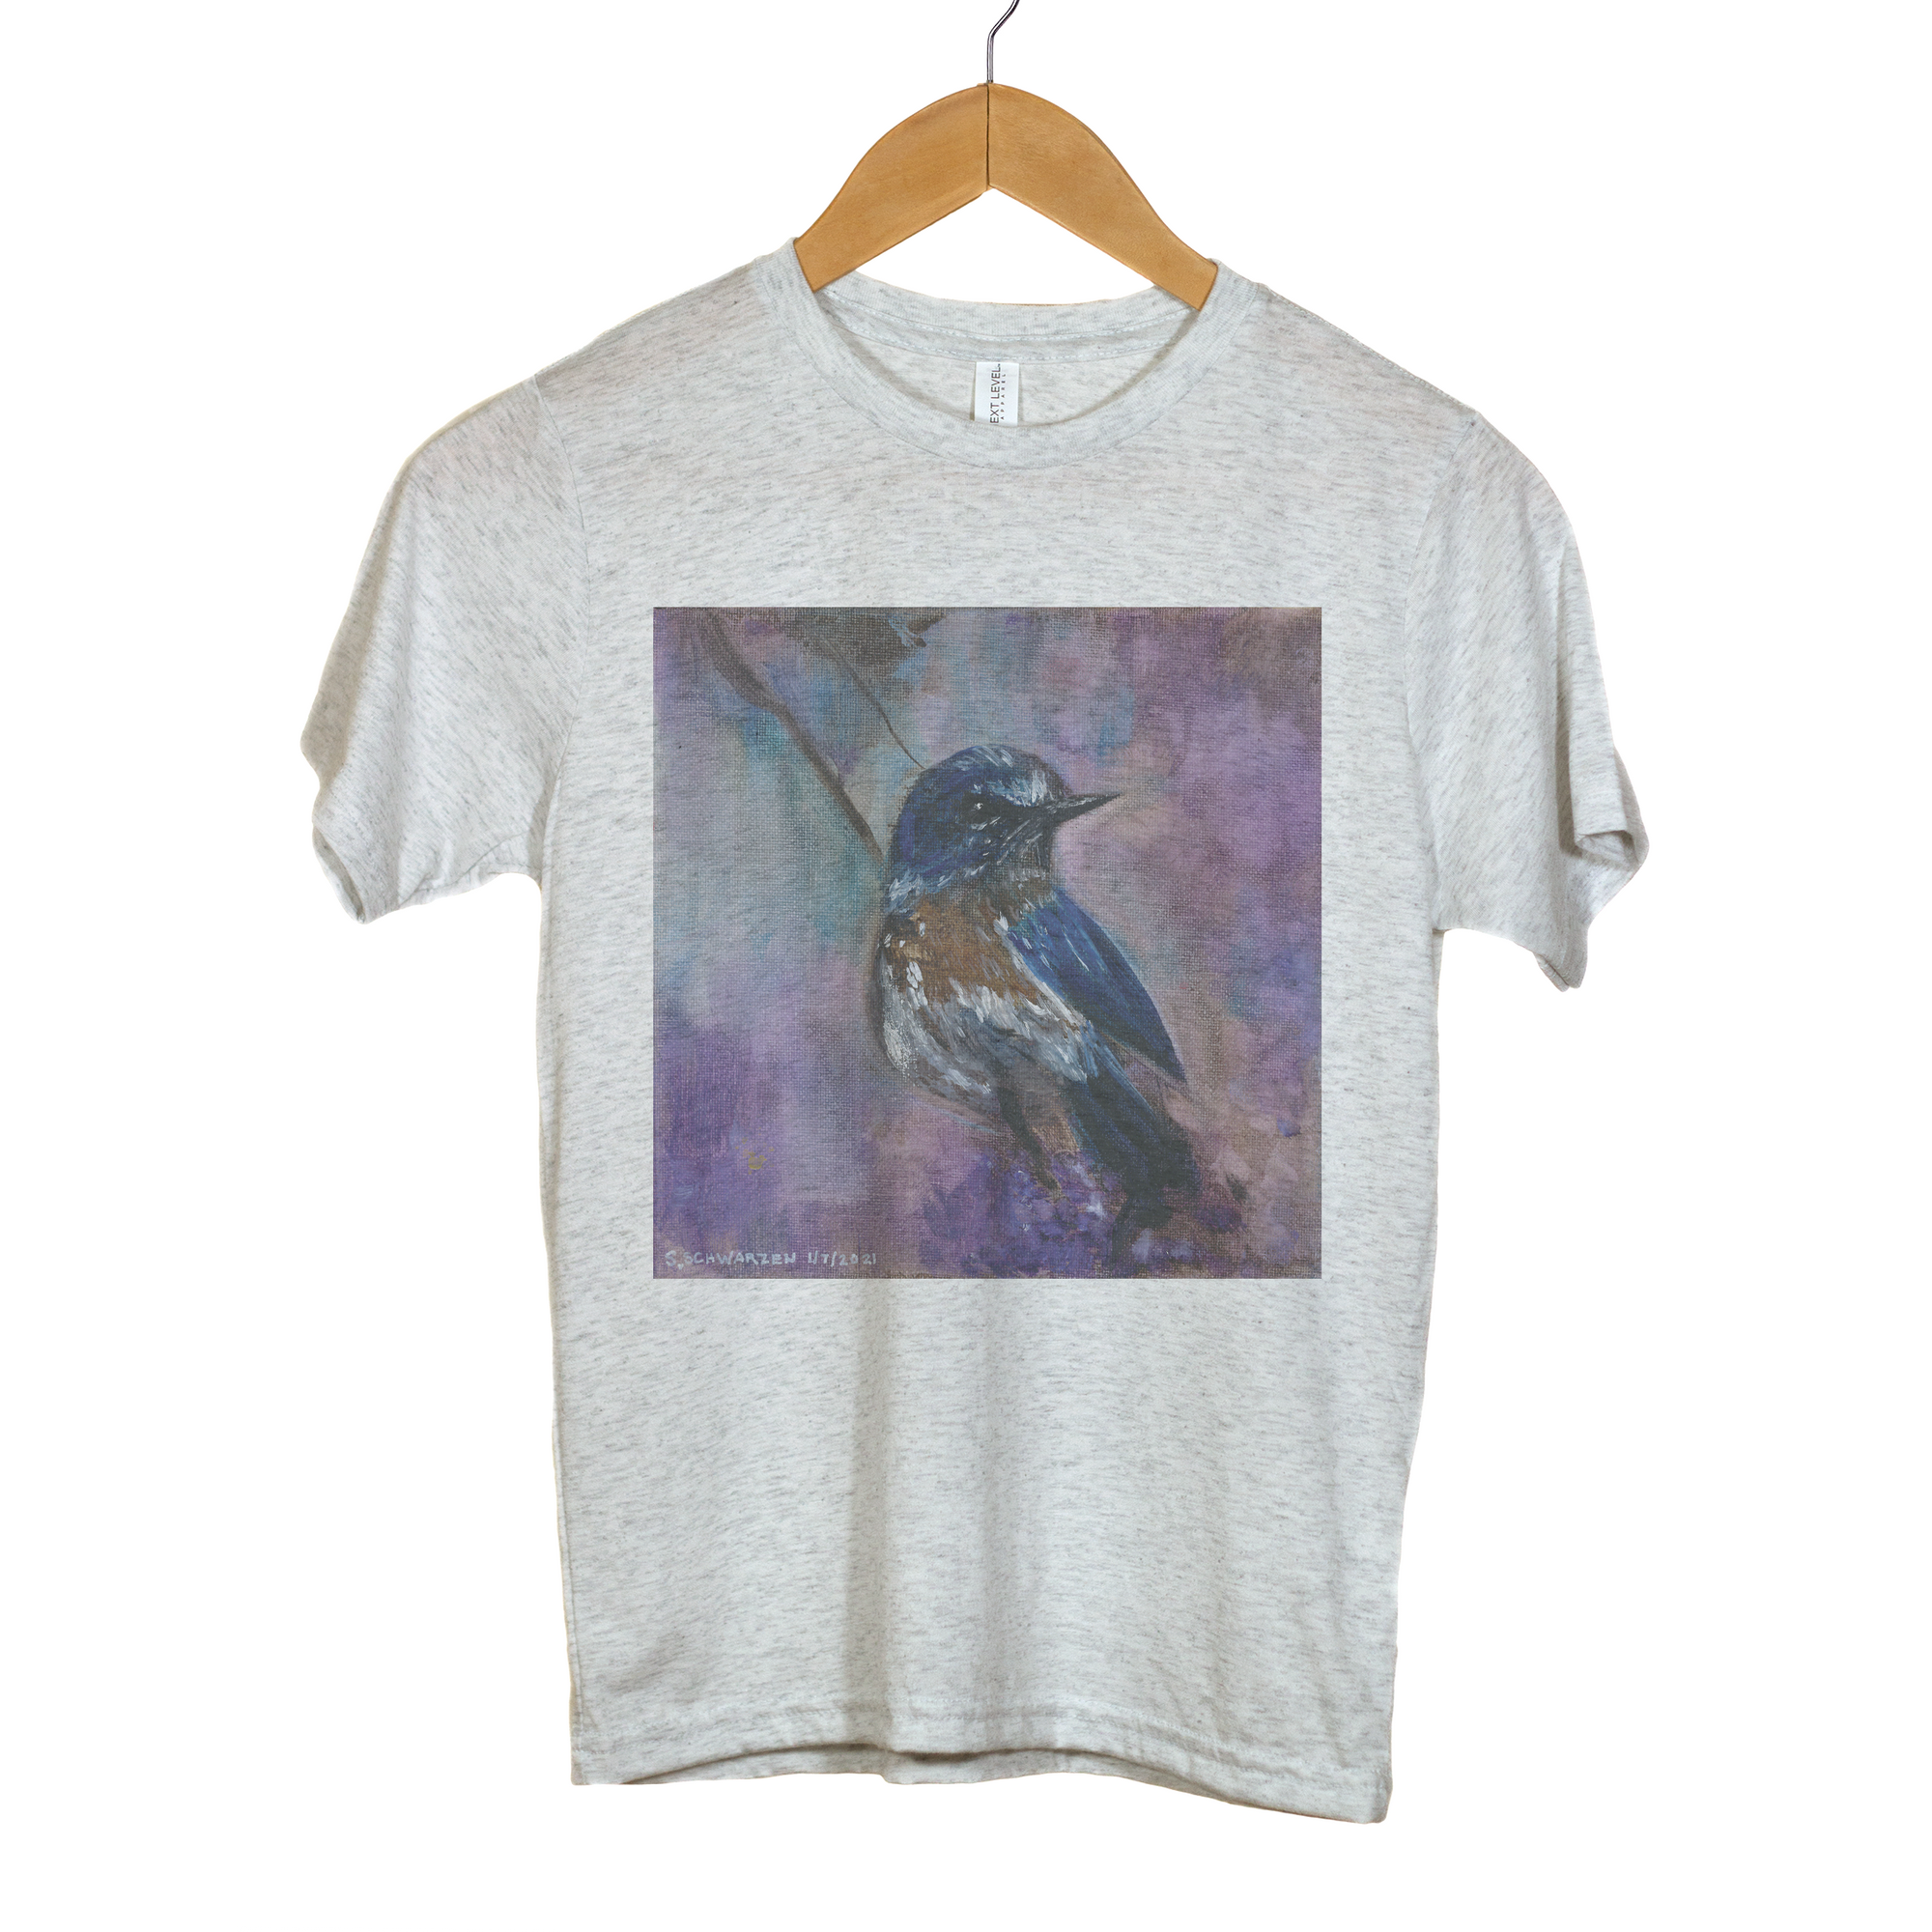 "The Bird" - YOUTH Triblend Tee